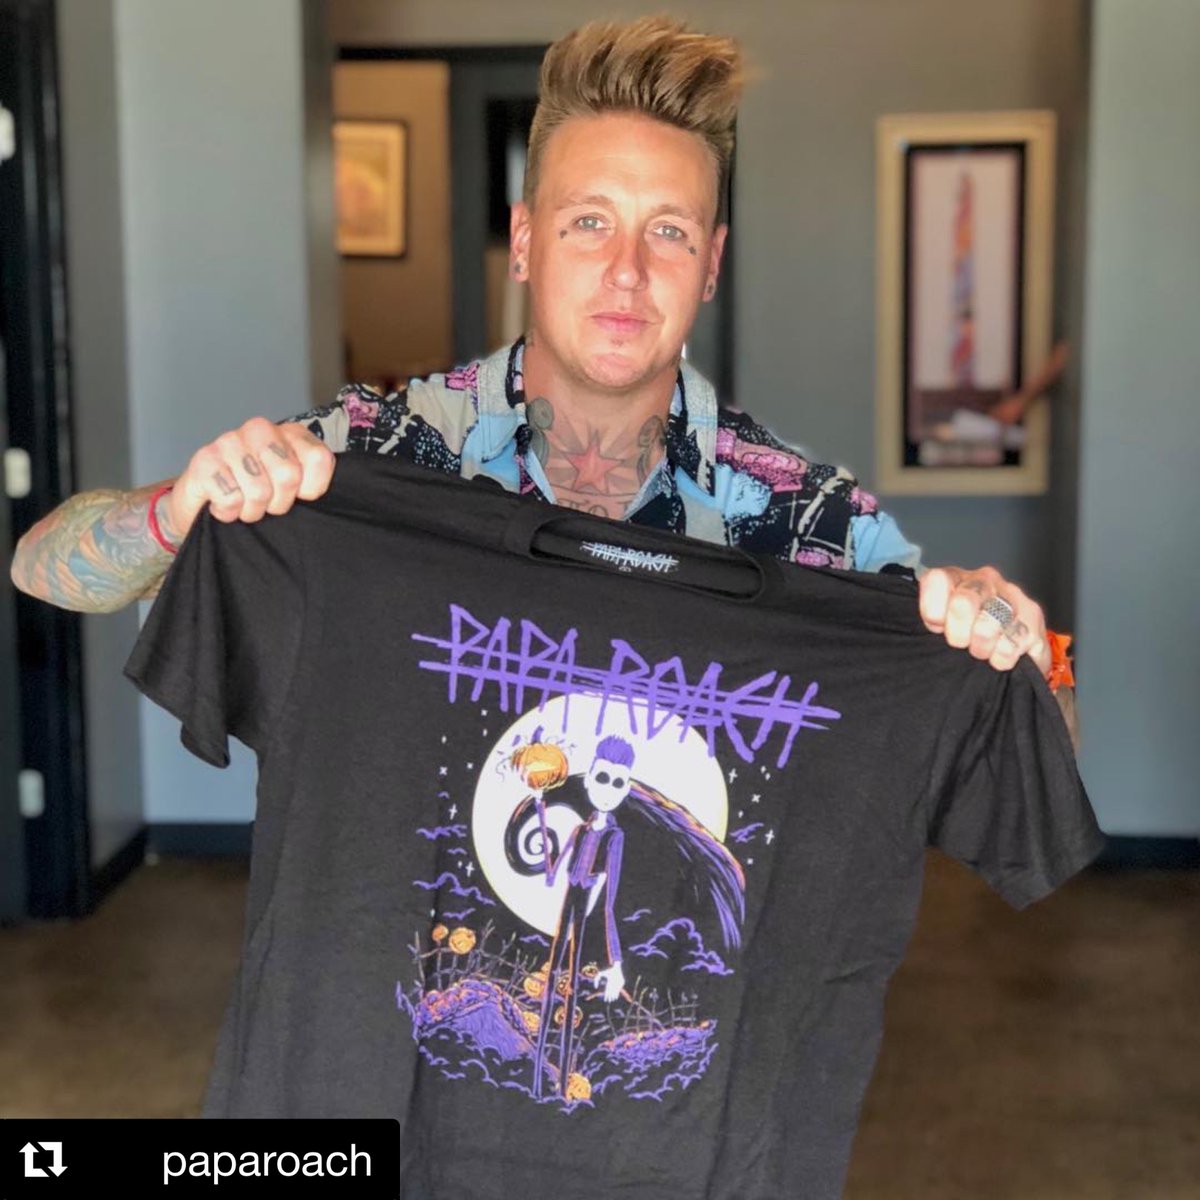 Emp Uk Jacoby Has Good Taste Definitely One To Add To The Band Tee Collection Find It And More Paparoach Merch Here T Co Nqw1tiyhtd A Papa Roach Fan Who Needs